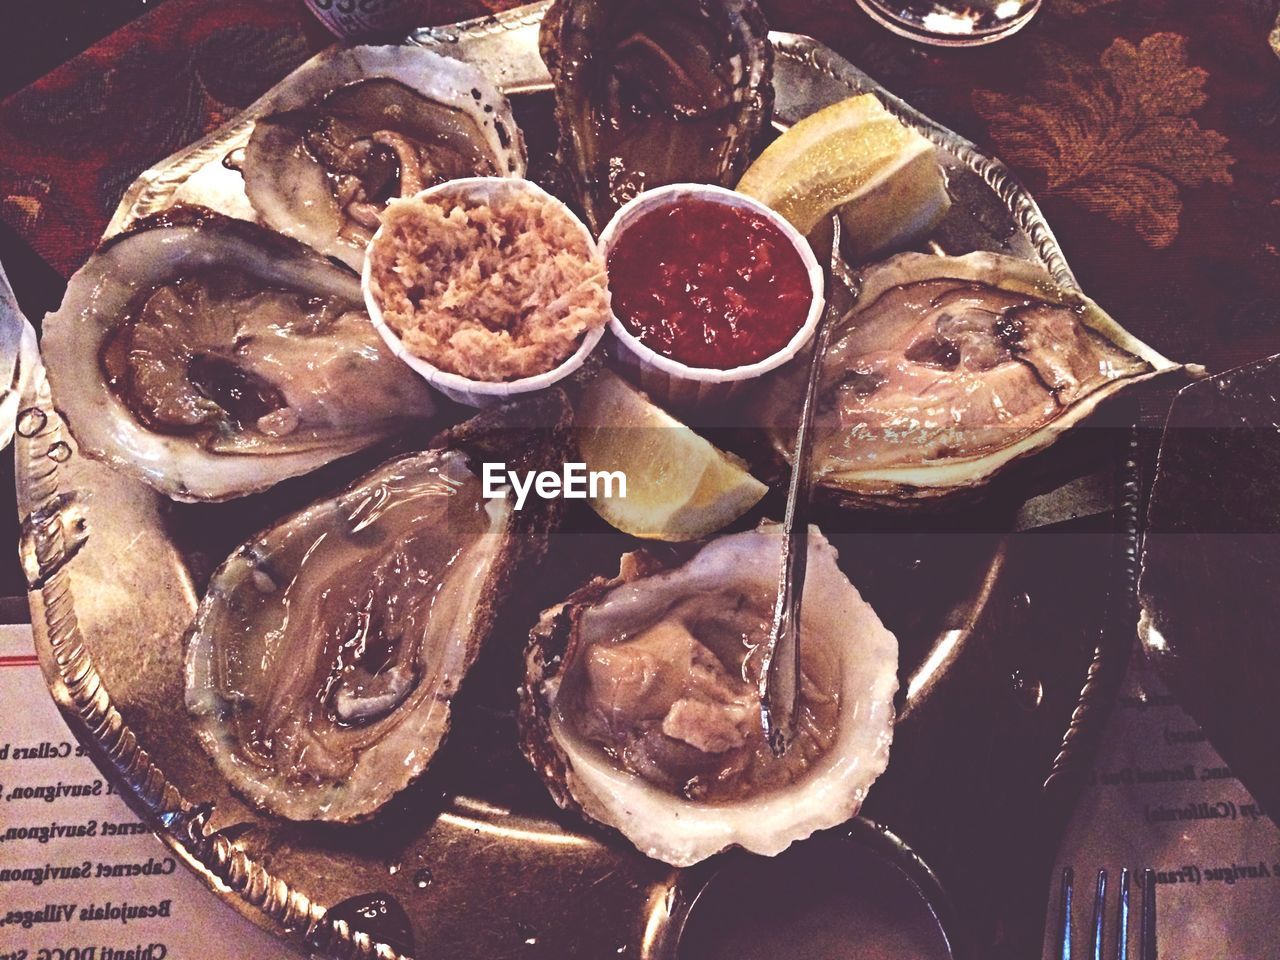 Oyster served in a plate